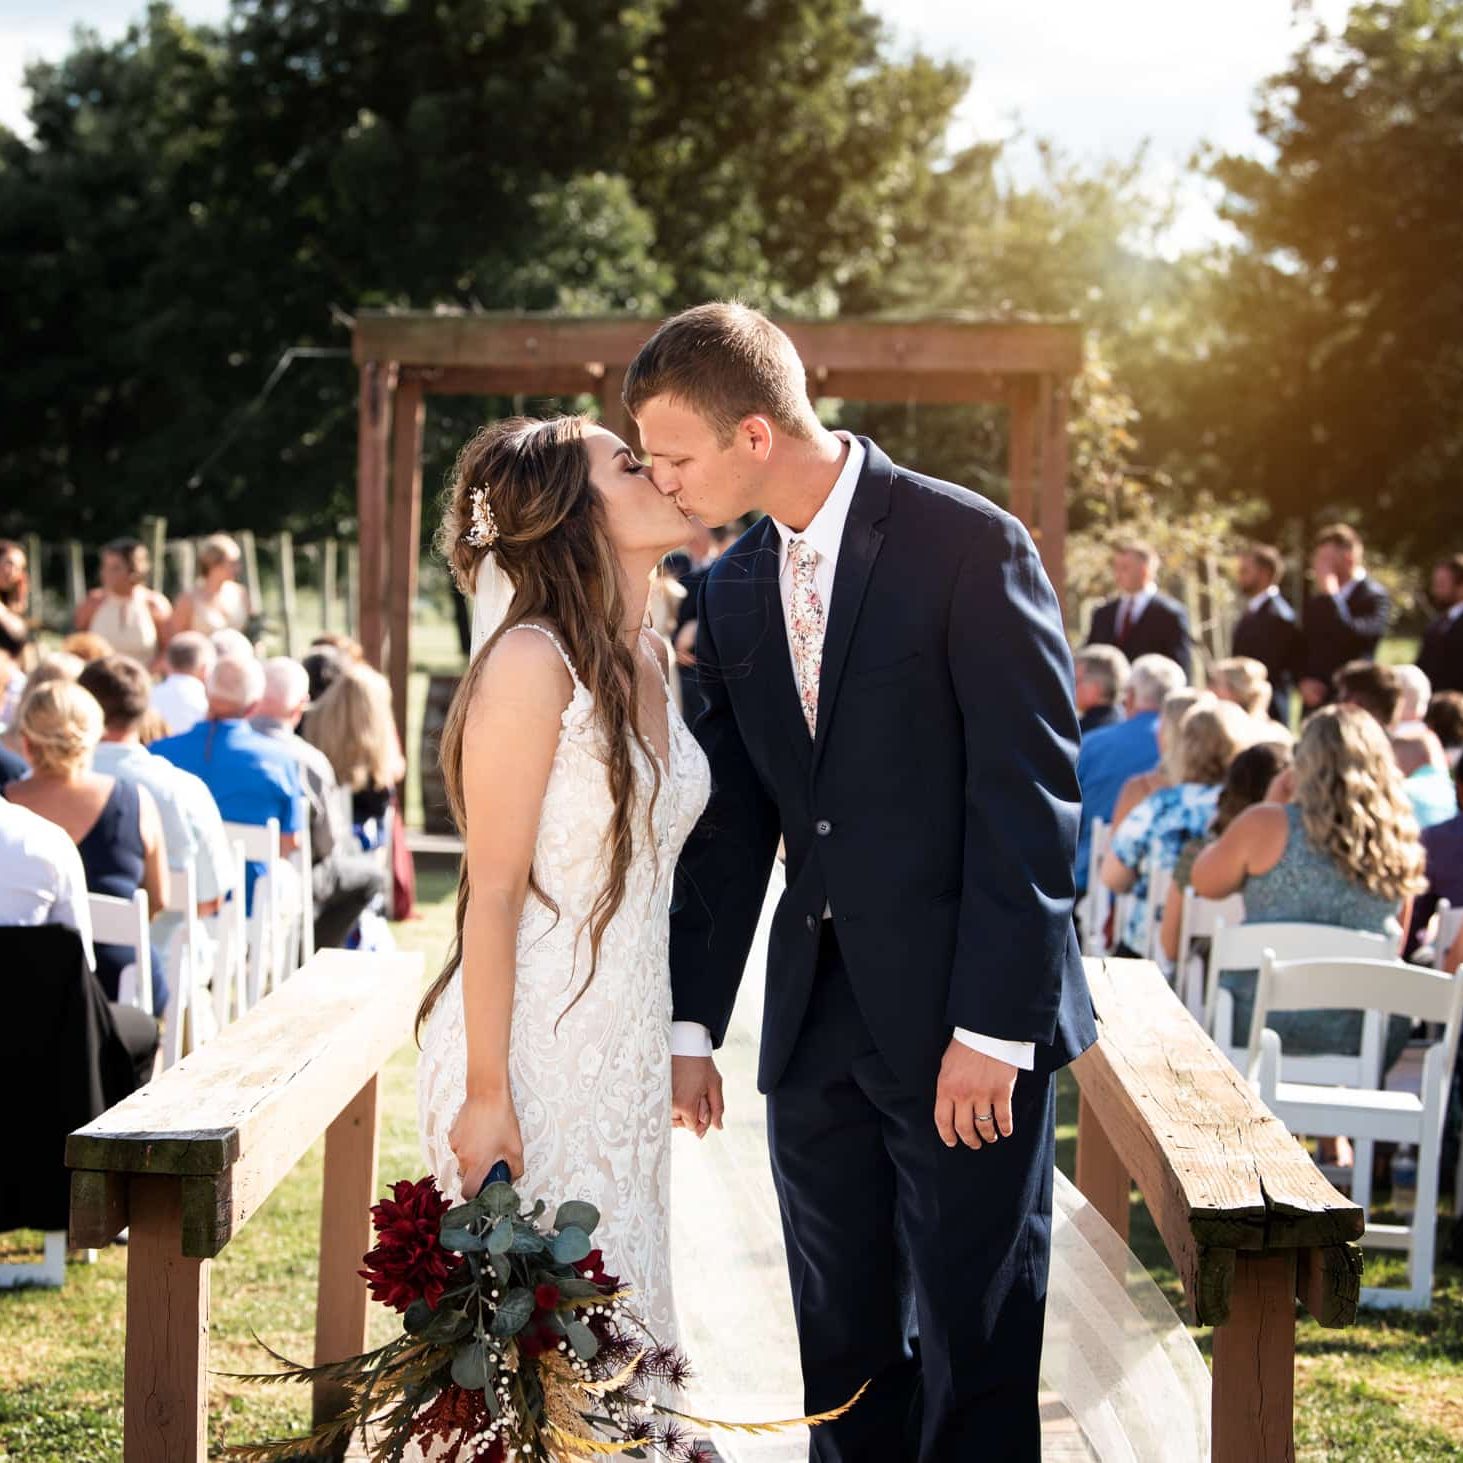 Bride and groom sharing a kiss after wedding ceremony